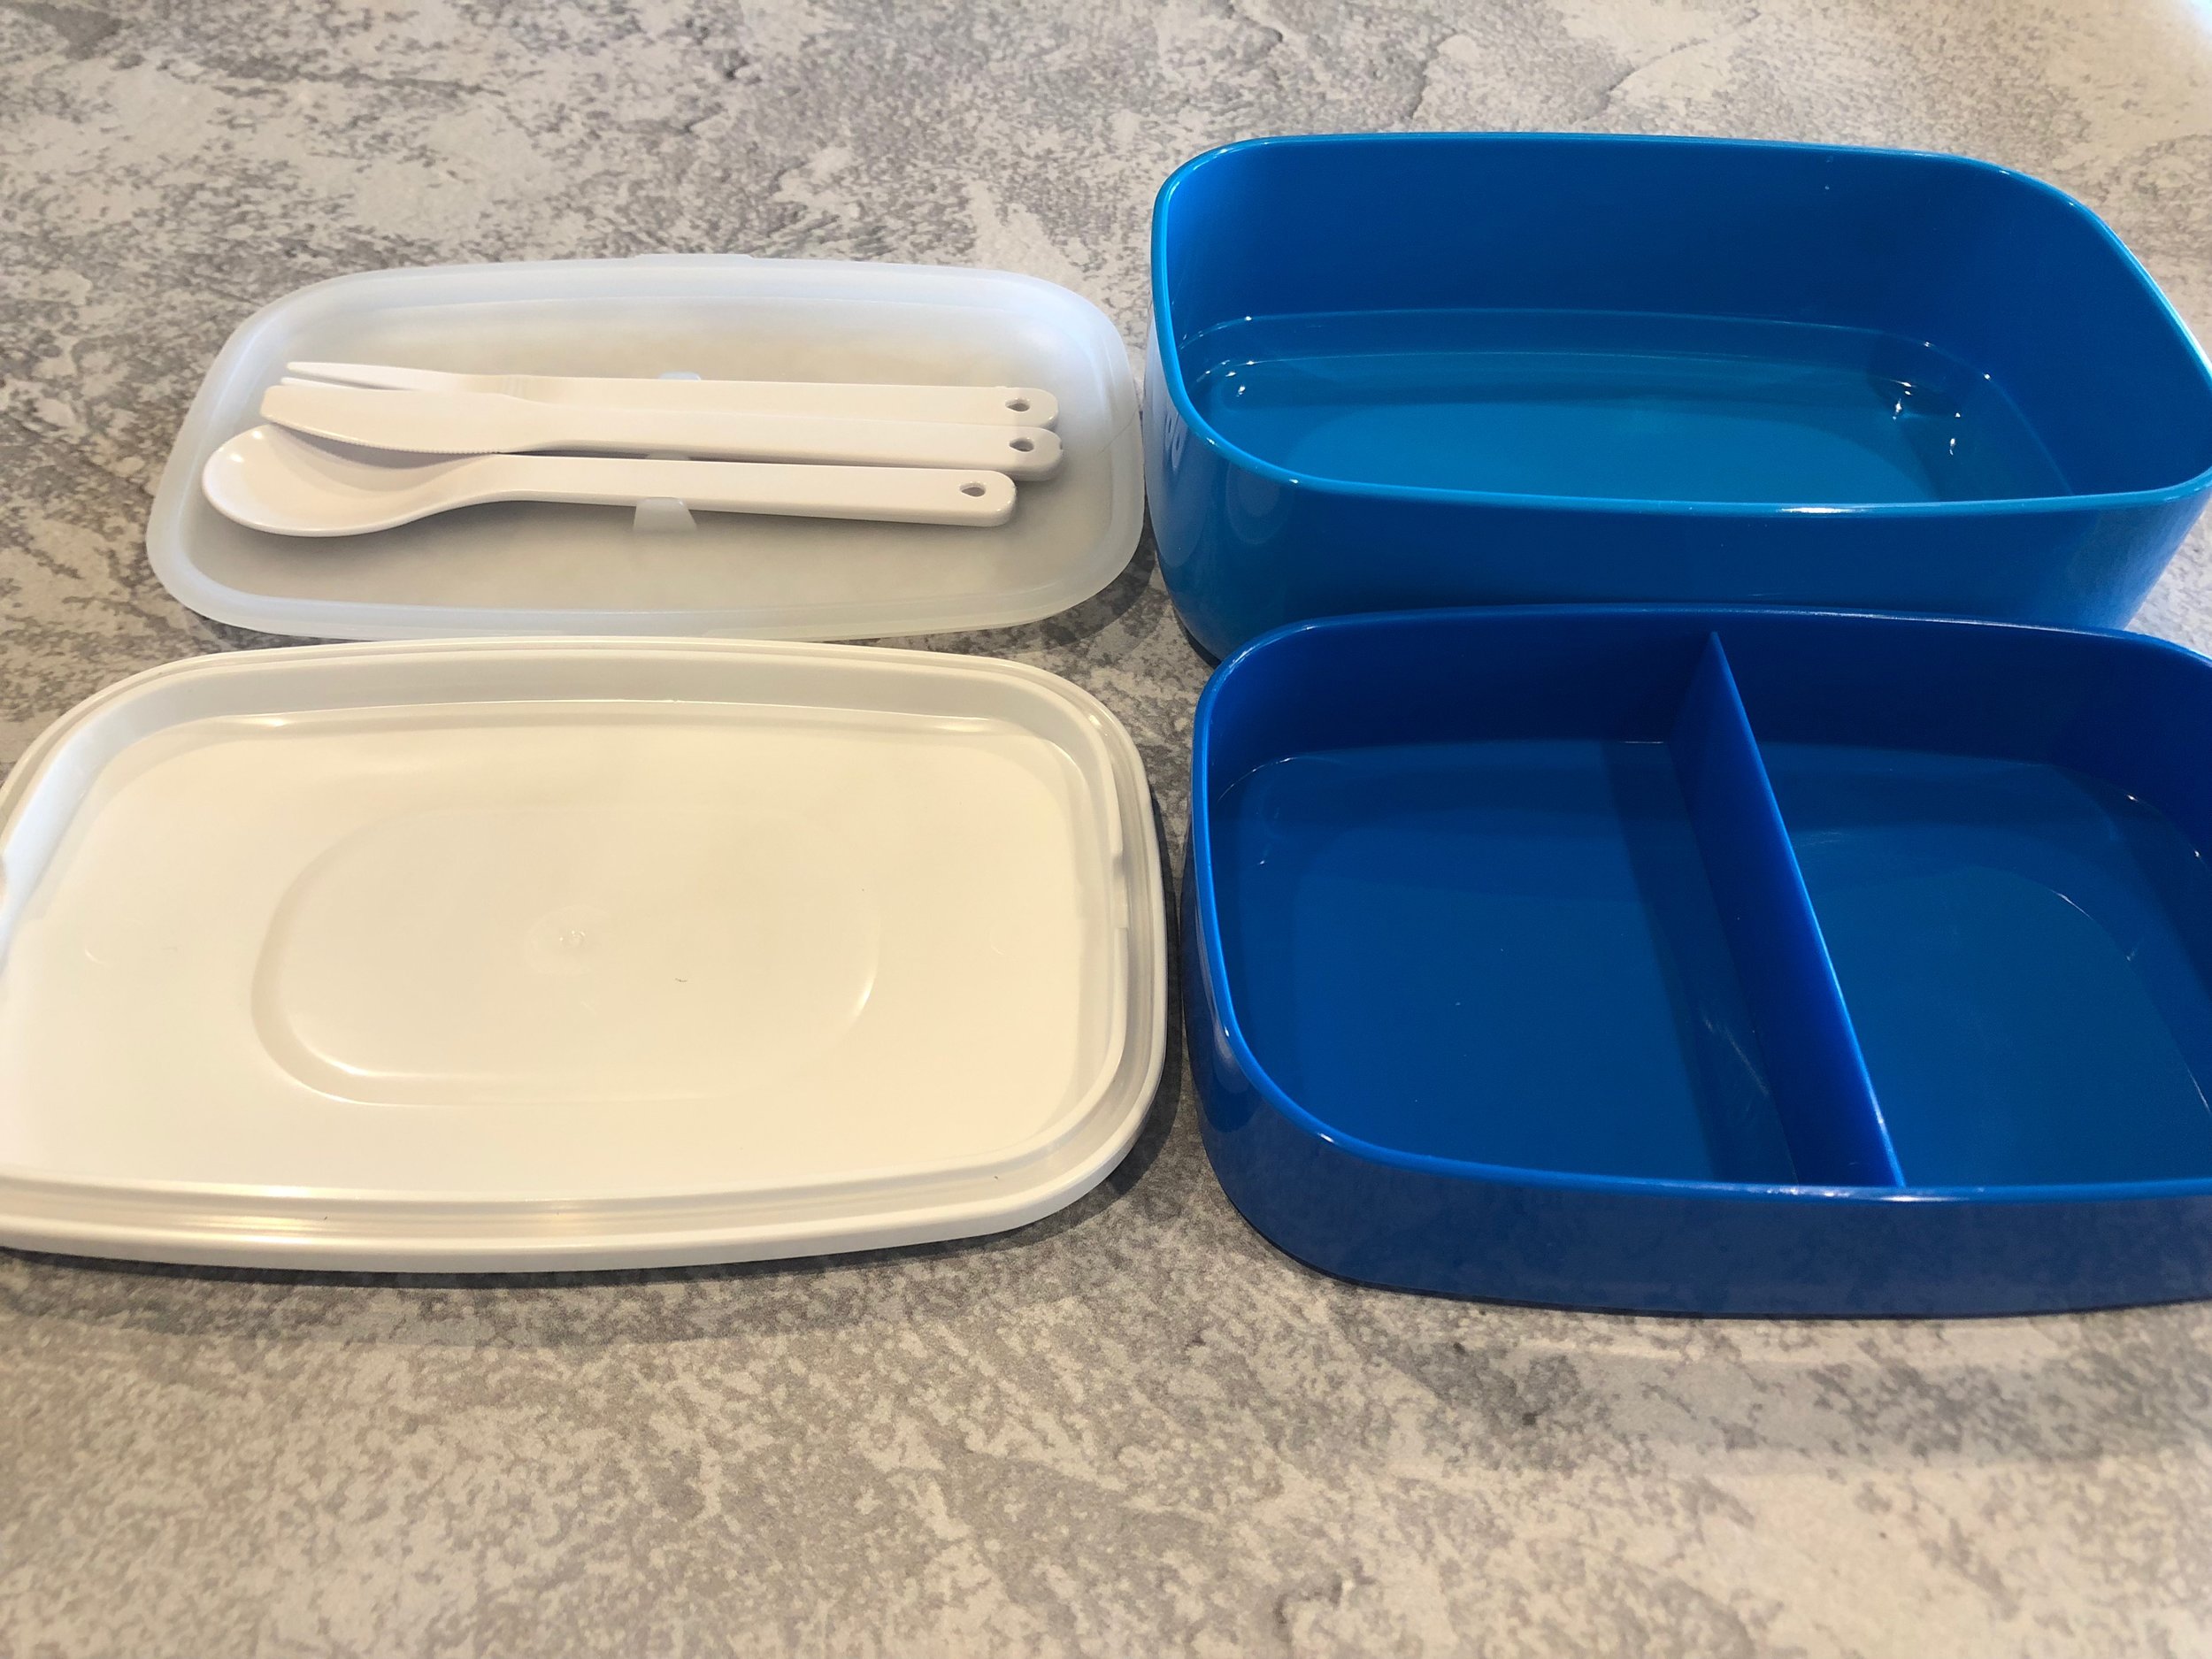 Bentgo Box Back to School Lunch Container for Keto and Low Carb Lunches